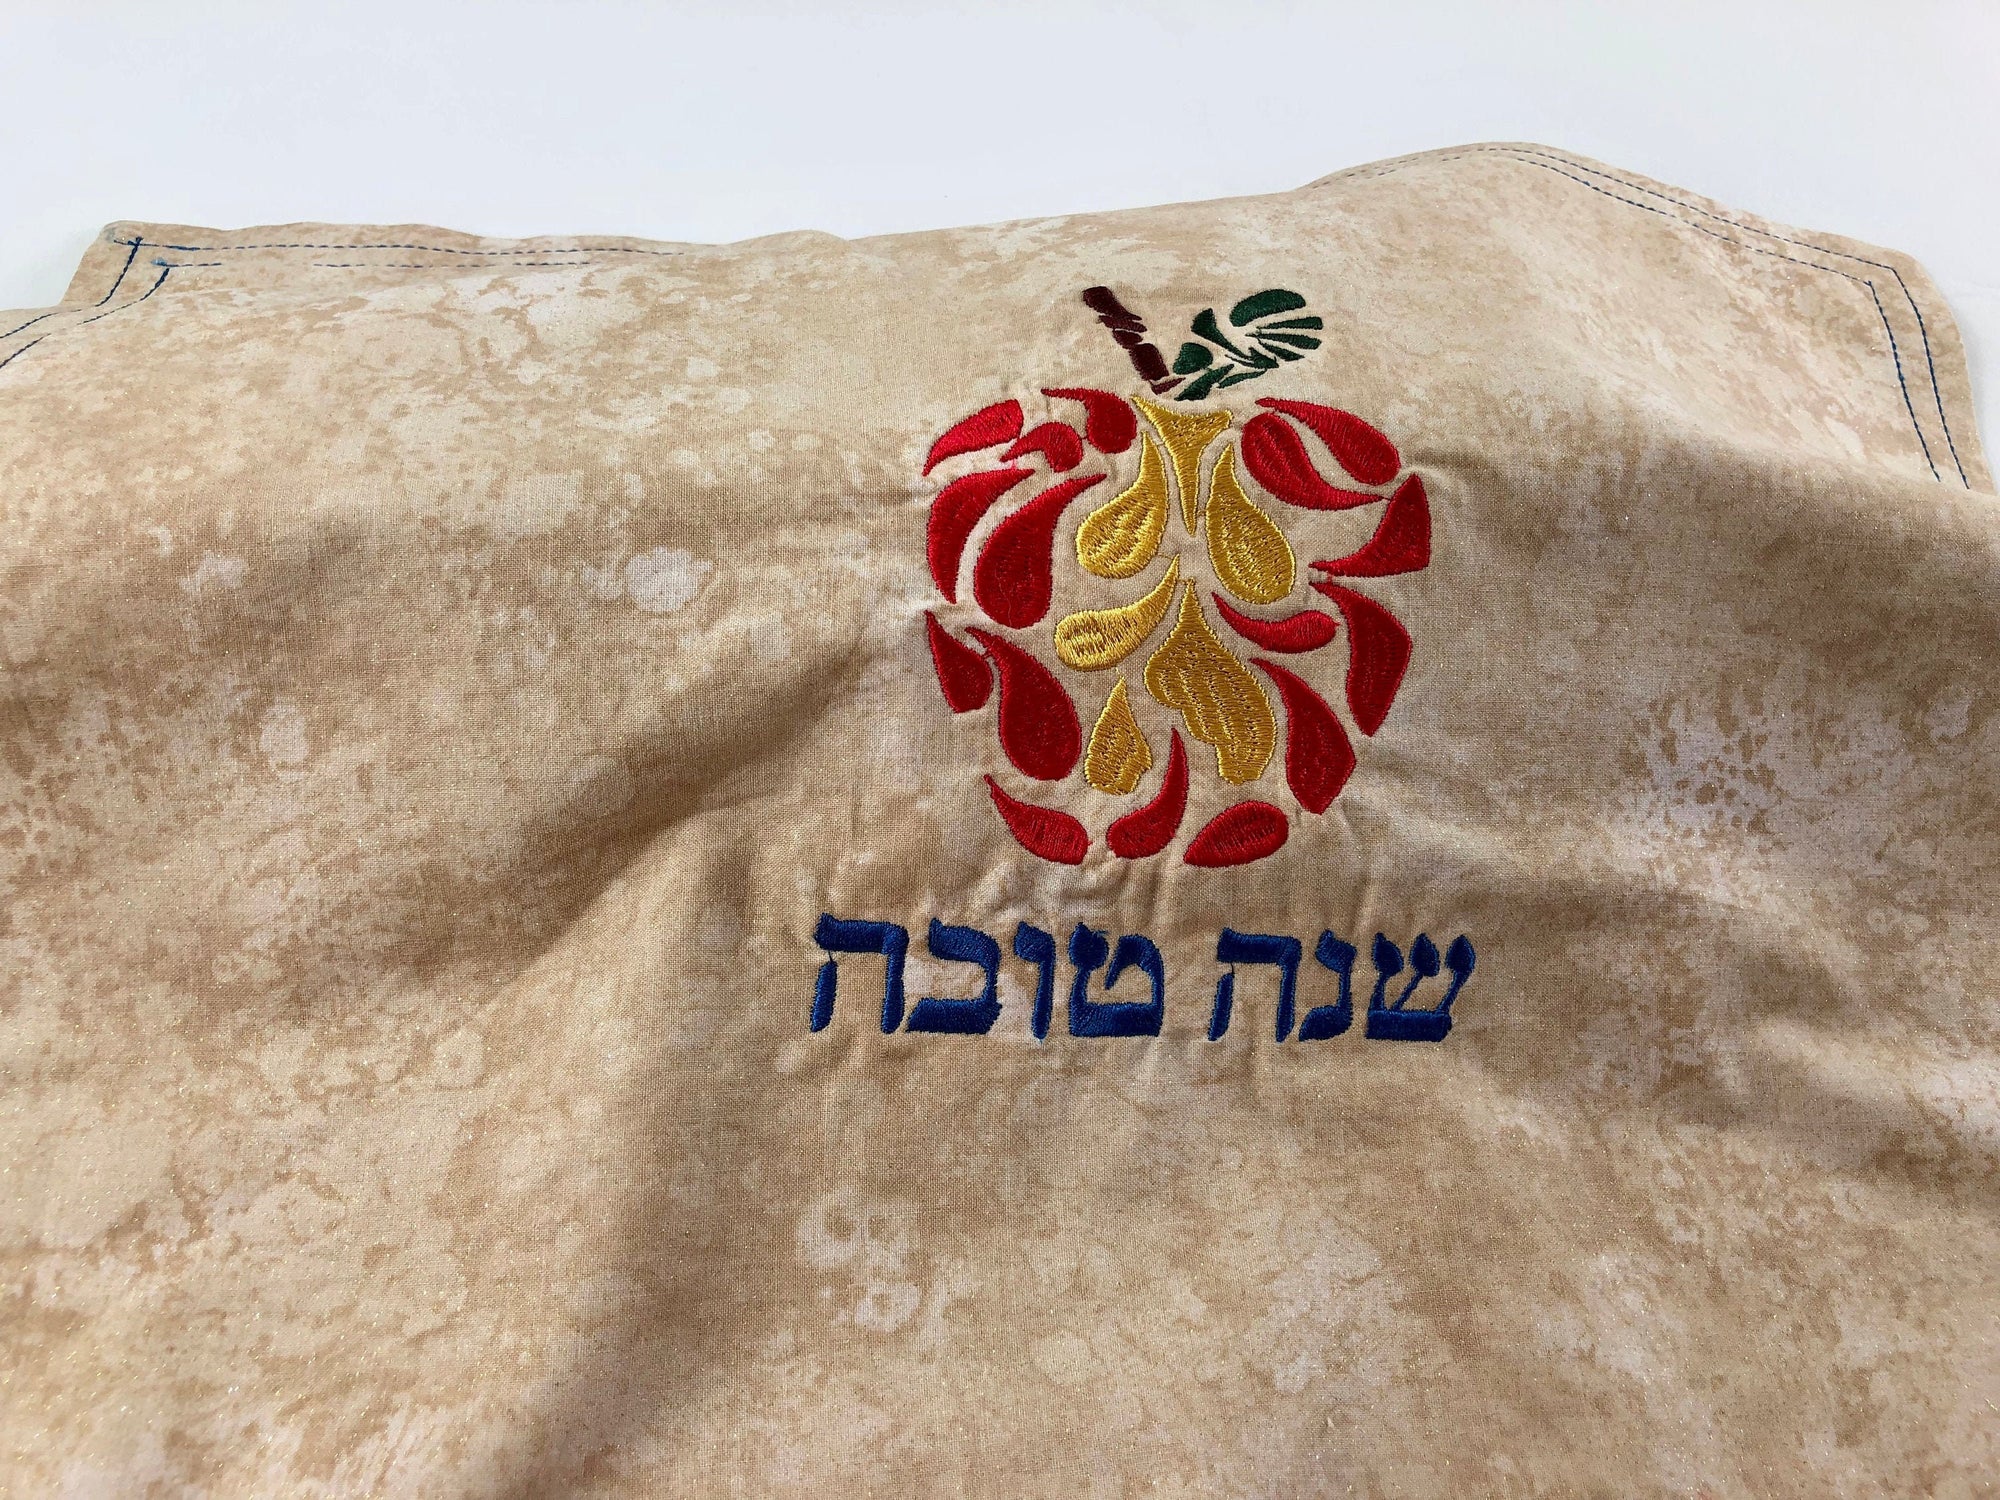 Beautiful Challah cover for Rosh Hashanah Apple Shana Tova in Hebrew One of a kind